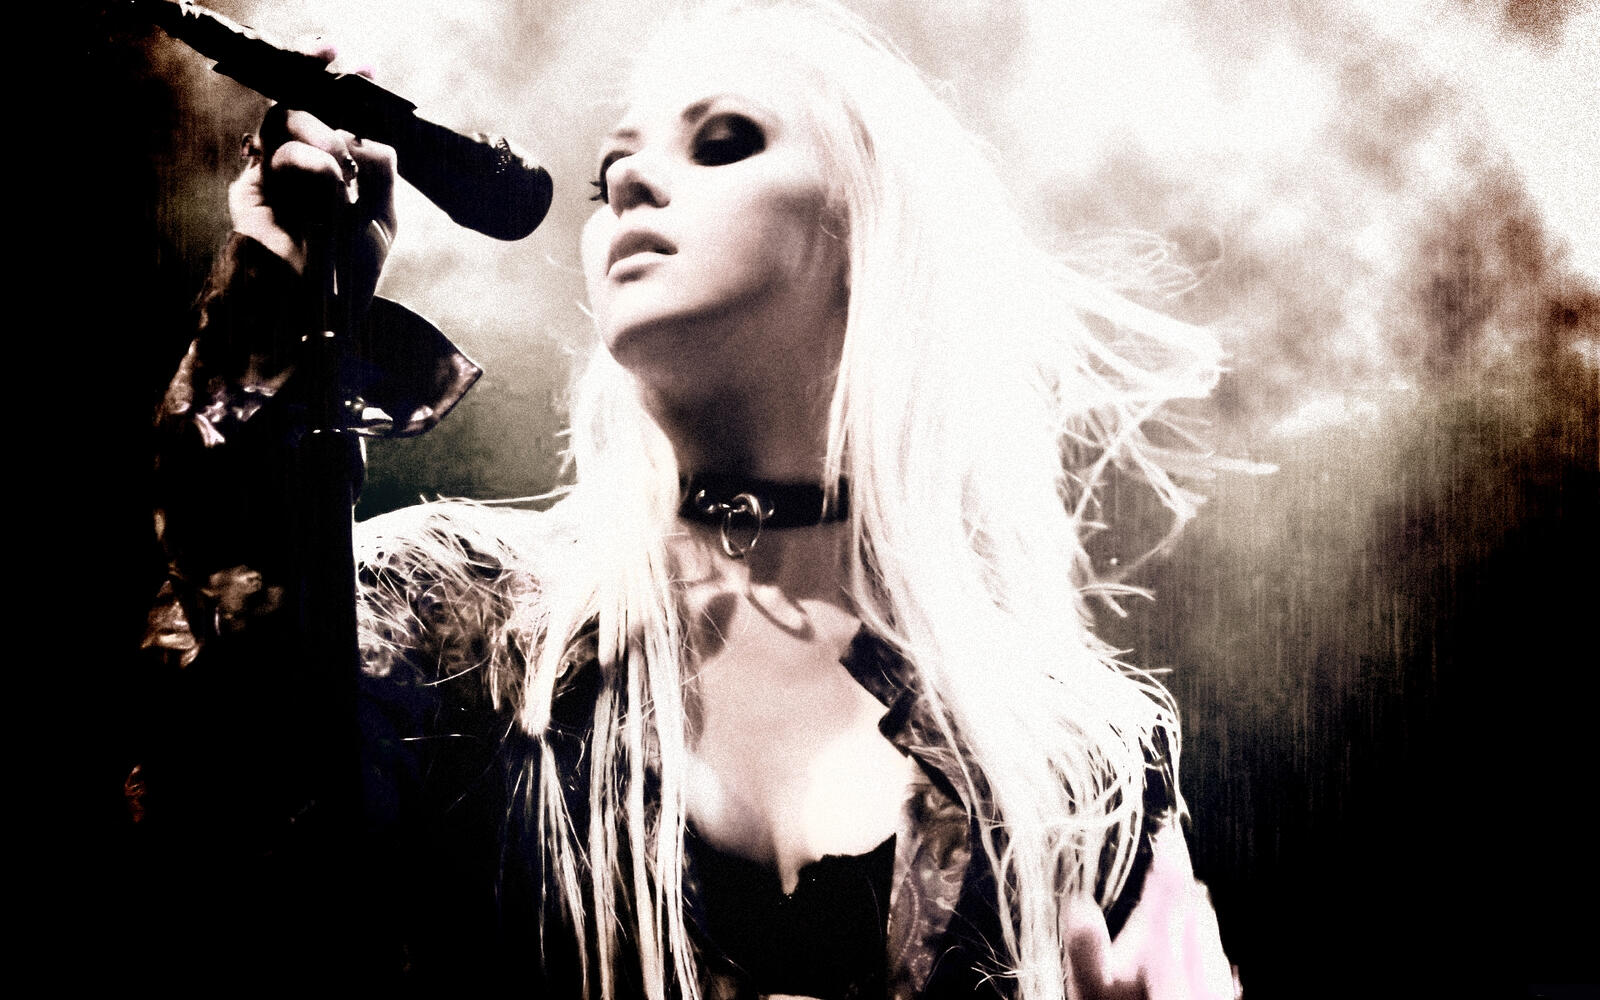 Wallpapers taylor momsen at a concert style on the desktop